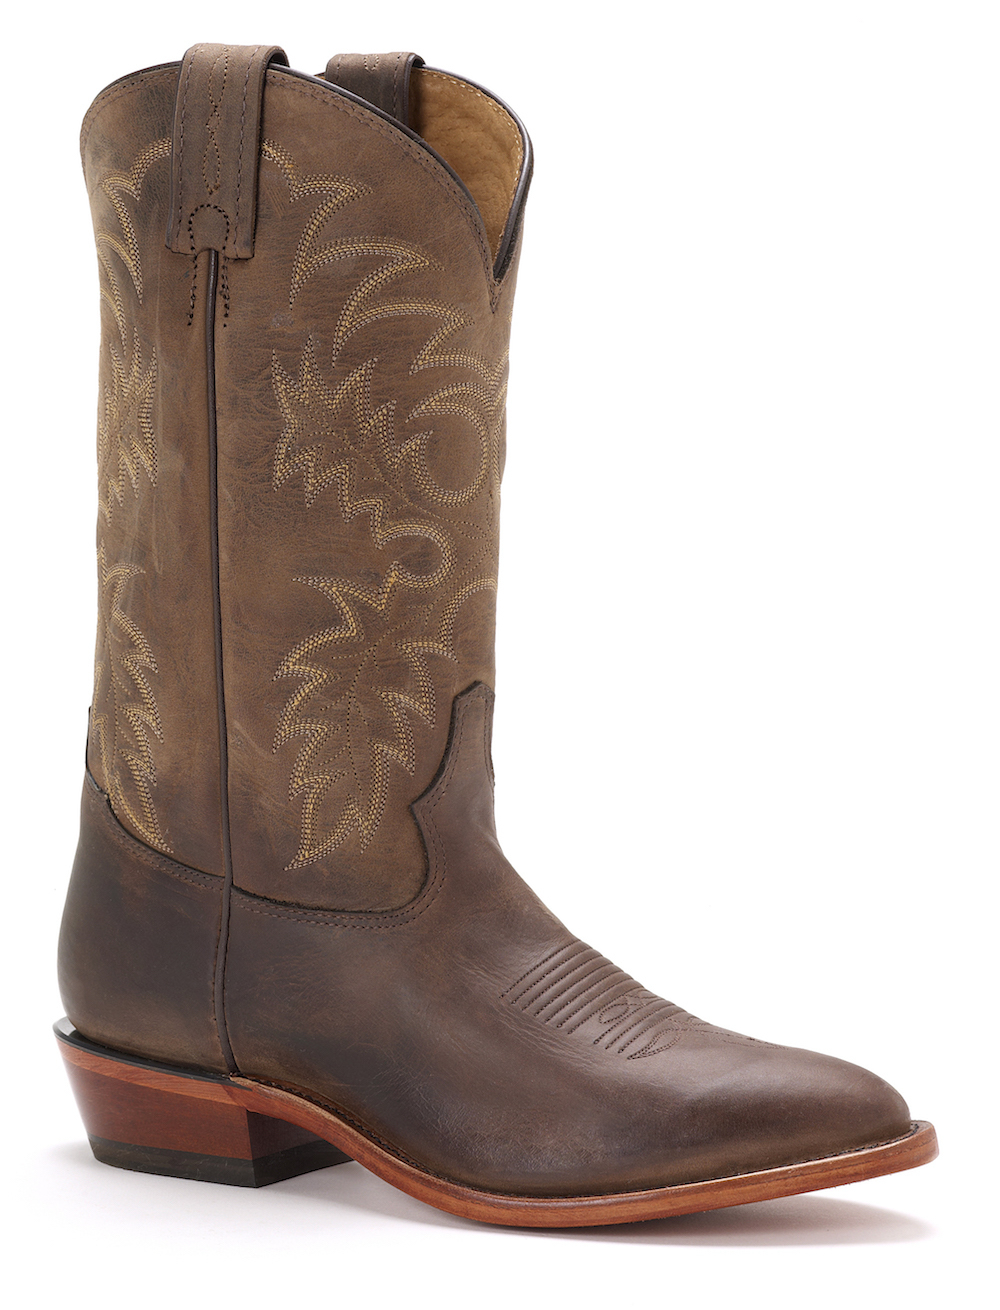 The History Of Cowboy Boots